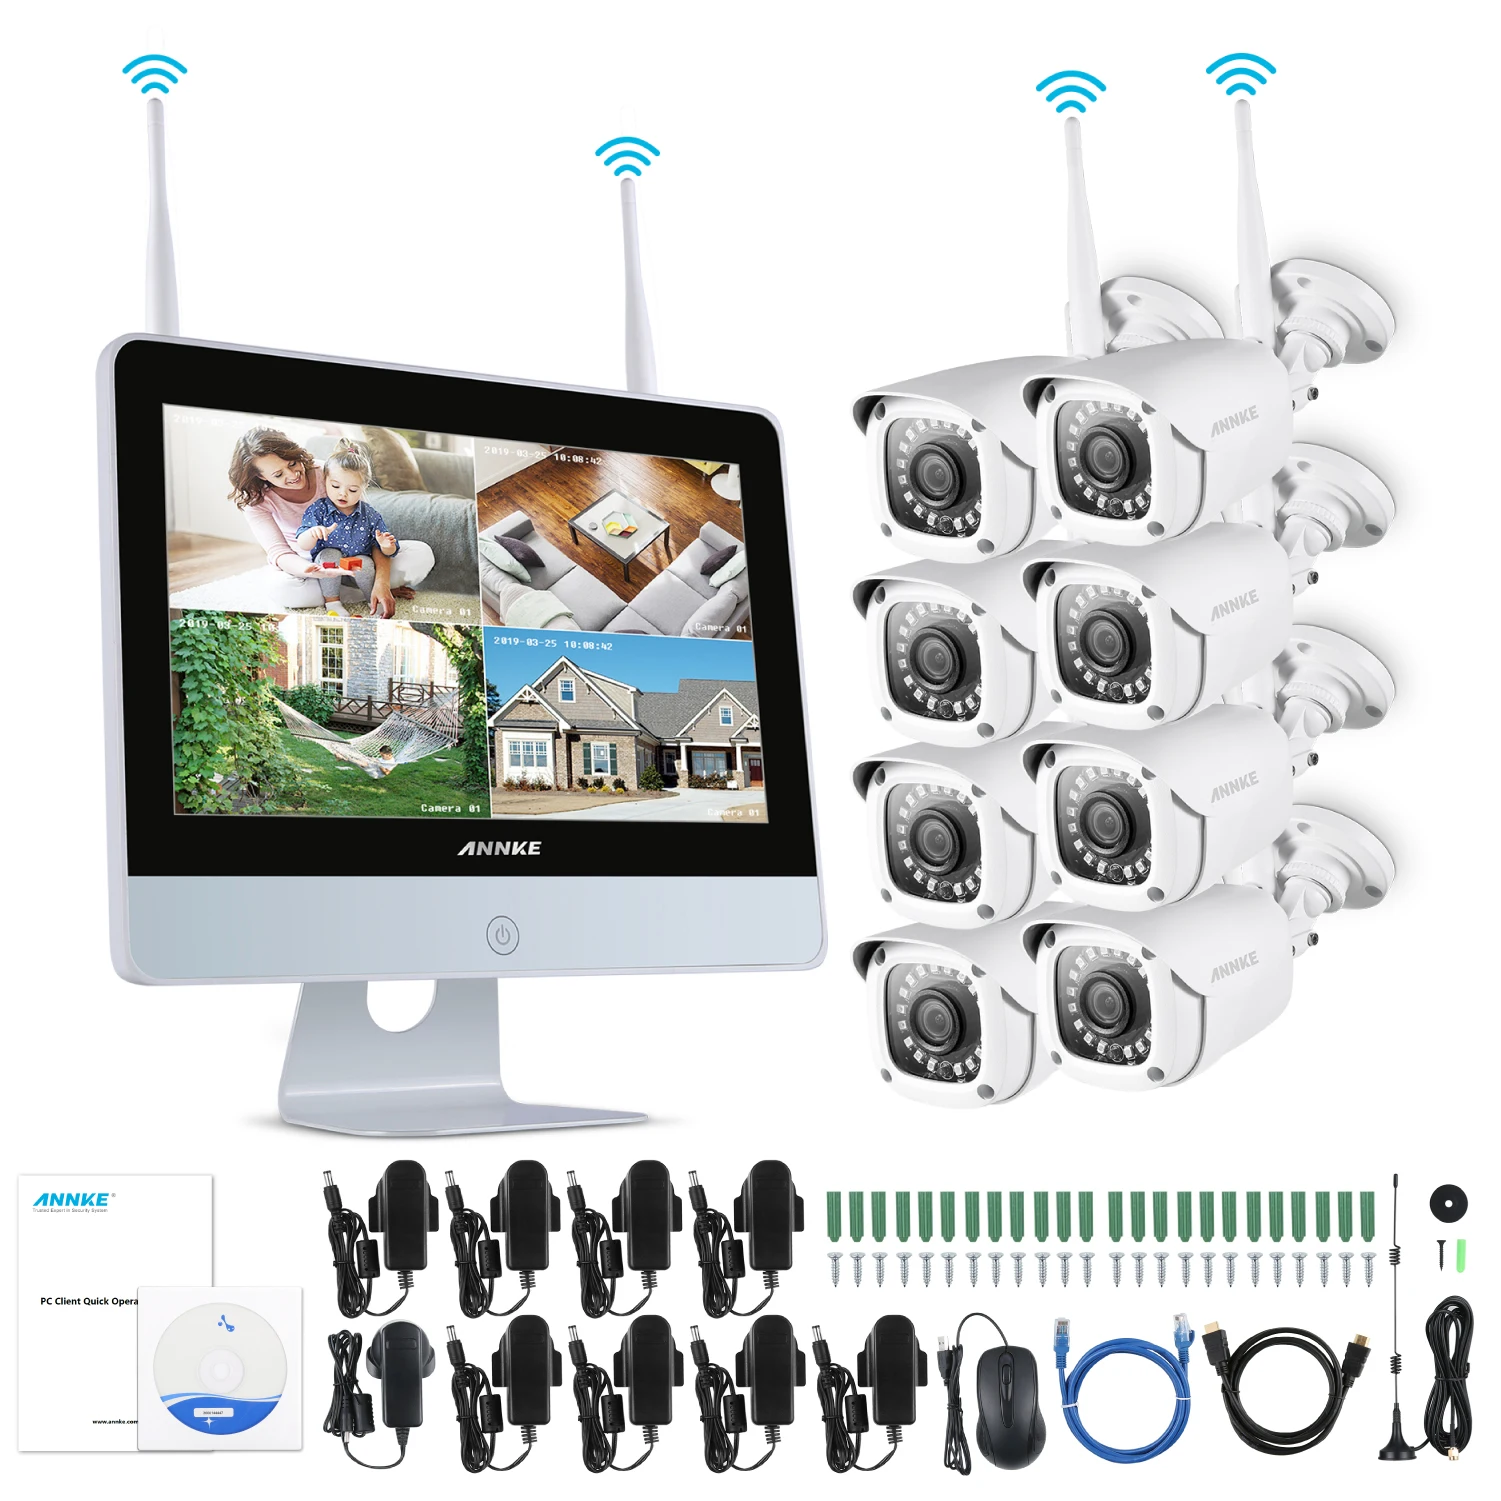 ANNKE 8CH 1080P FHD Wireless Video Security System 12inch LCD Screen NVR 4X8X 2MP Bullet IP Camera Outdoor CCTV Surveillance Kit - Цвет: 8PCS Cameras